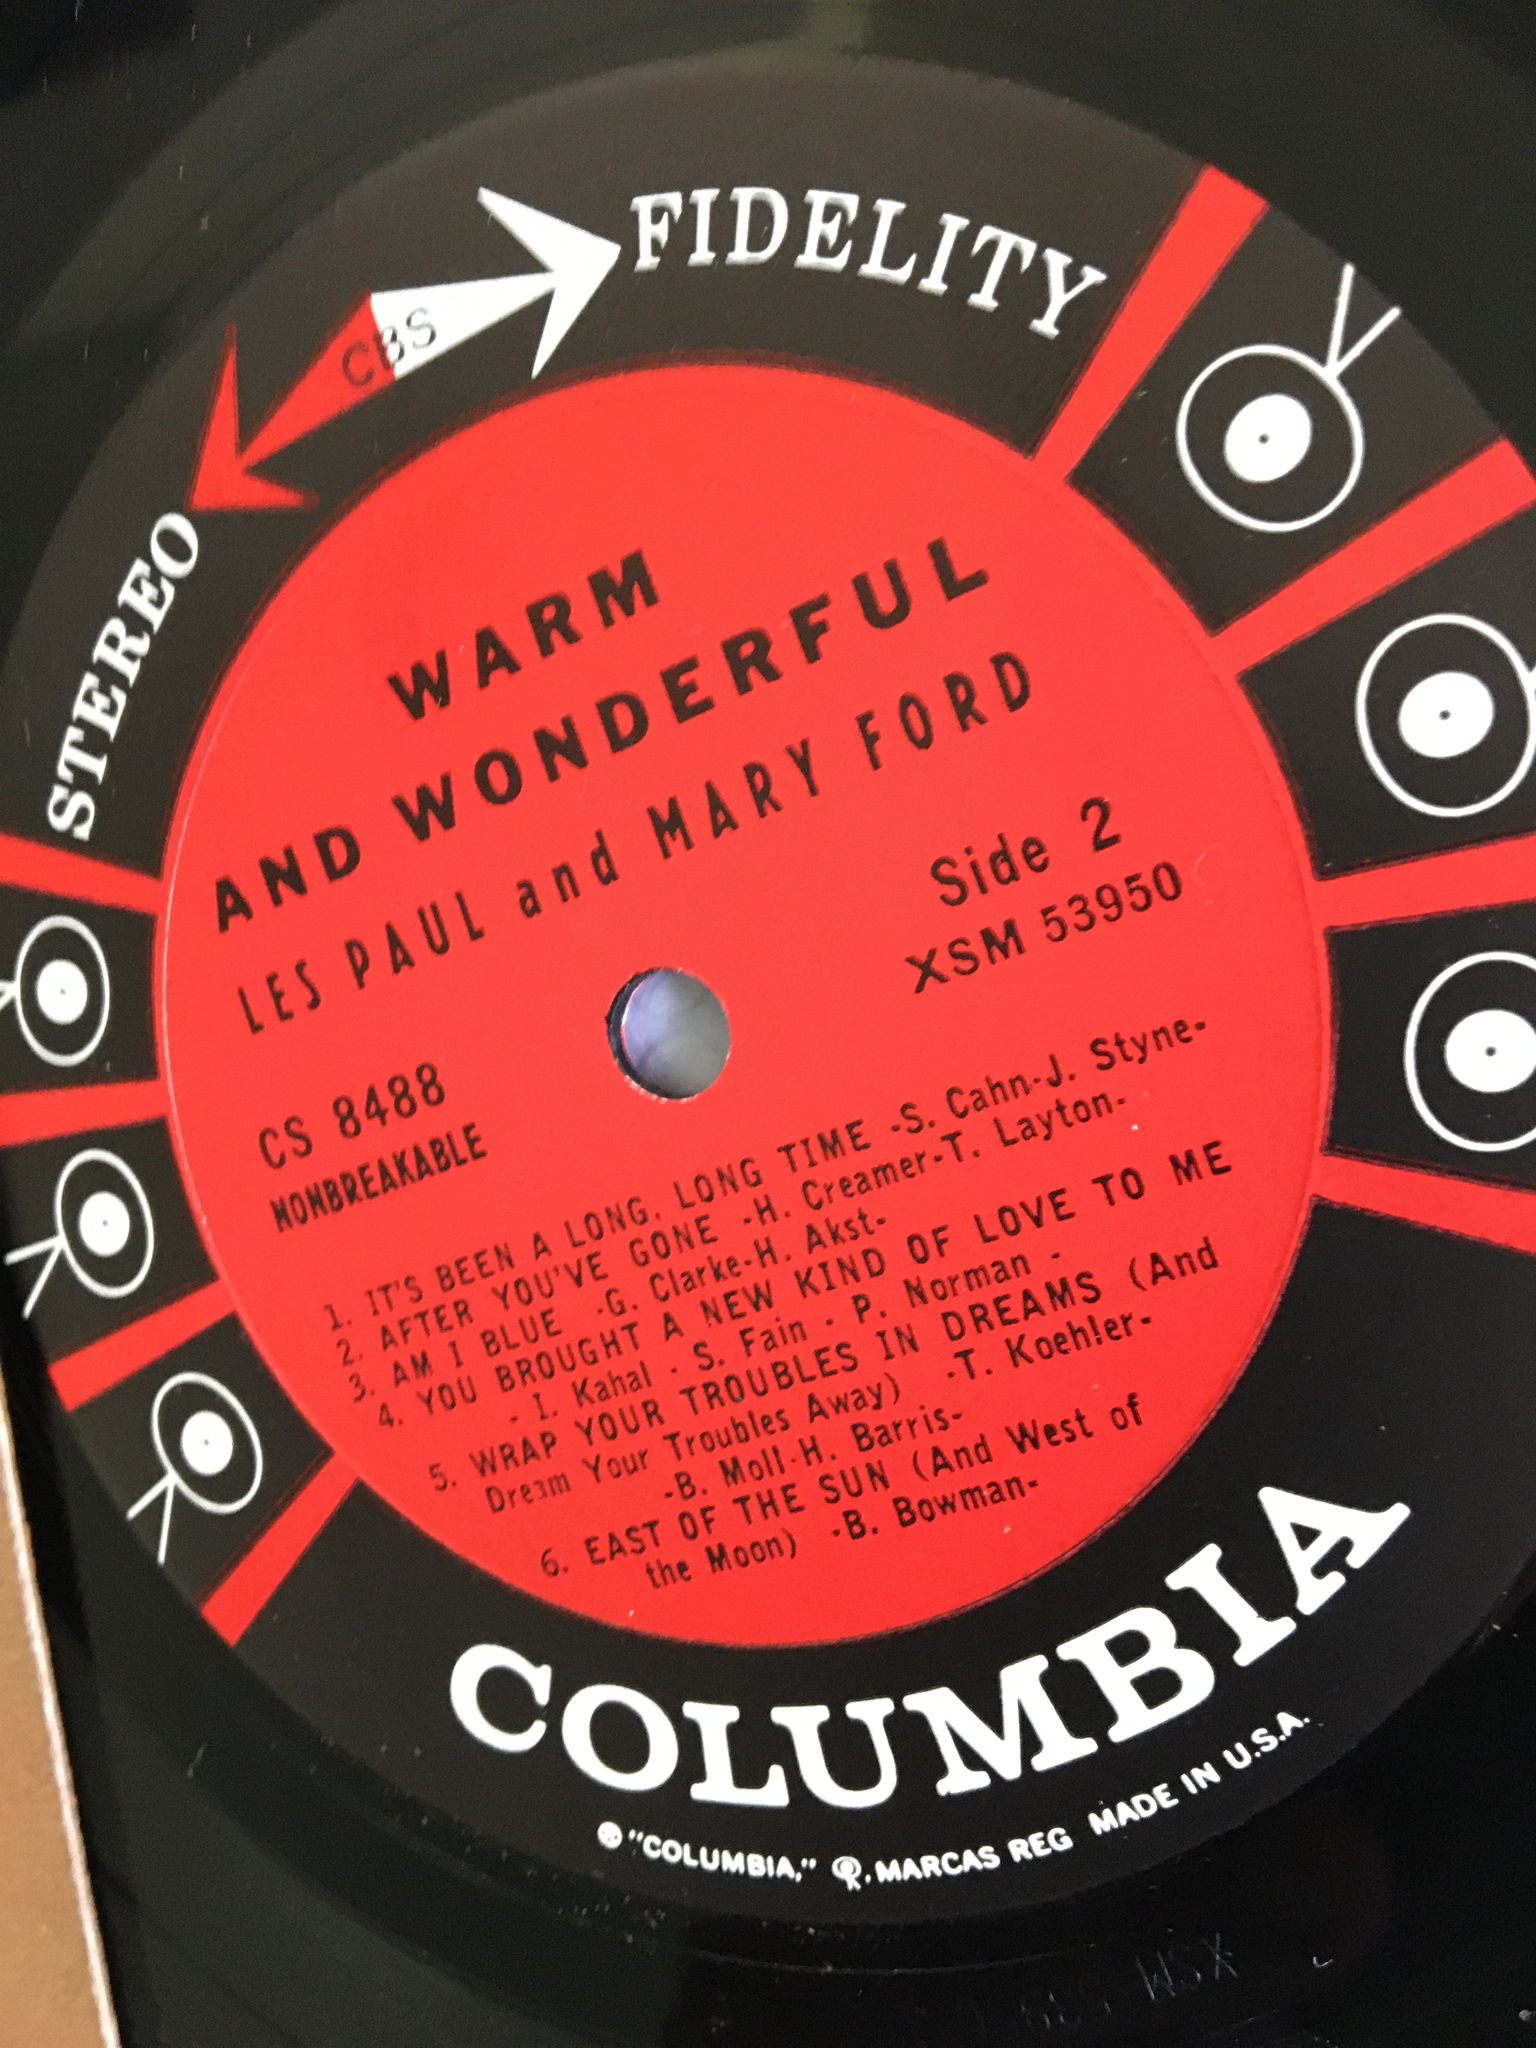 Les Paul & Mary Ford  Warm & Wonderful Lp record stereo 3